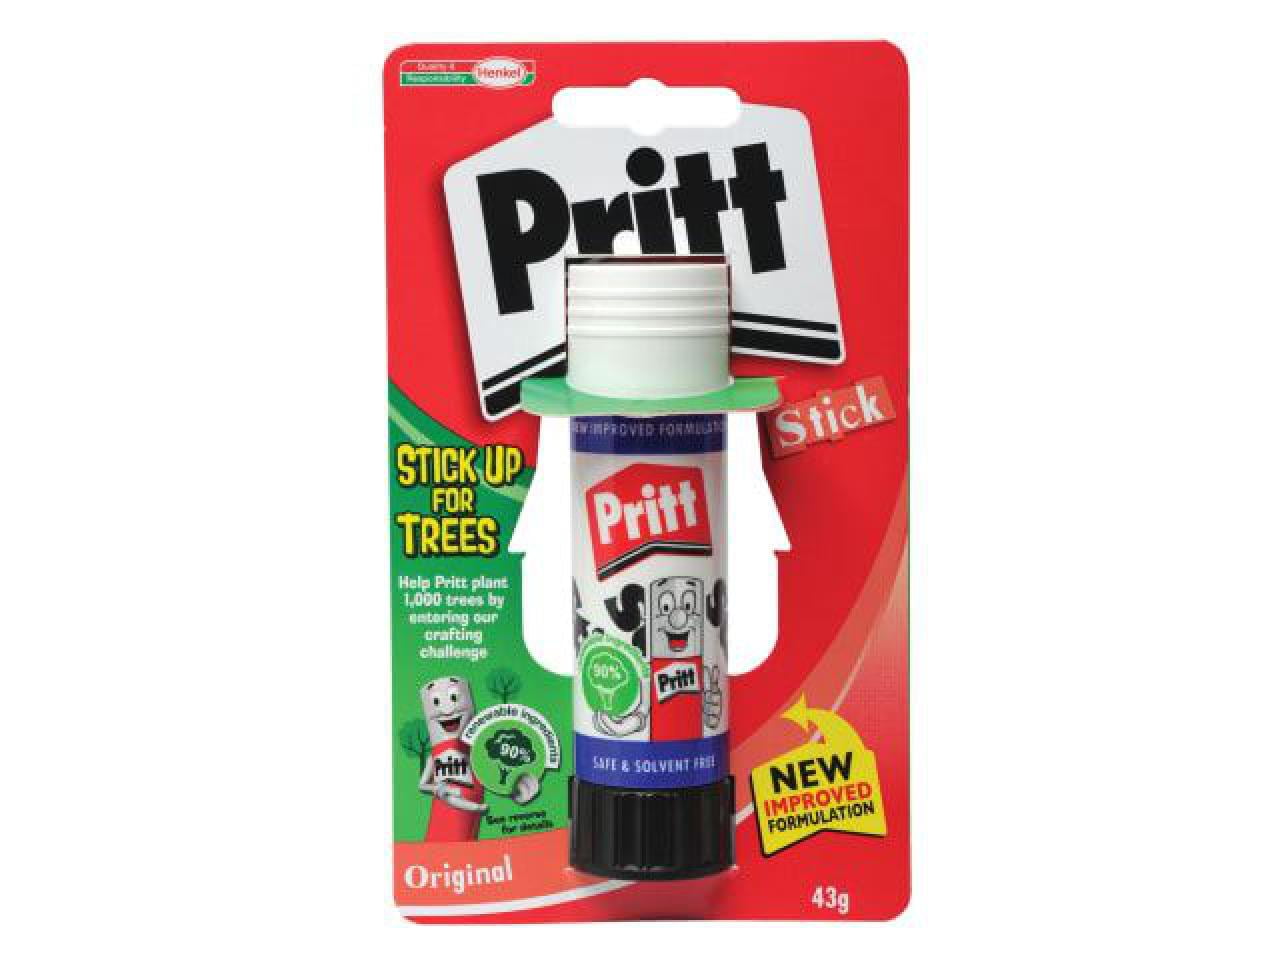 Pritt 22g Glue Stick Triple Pack - Incredible Connection